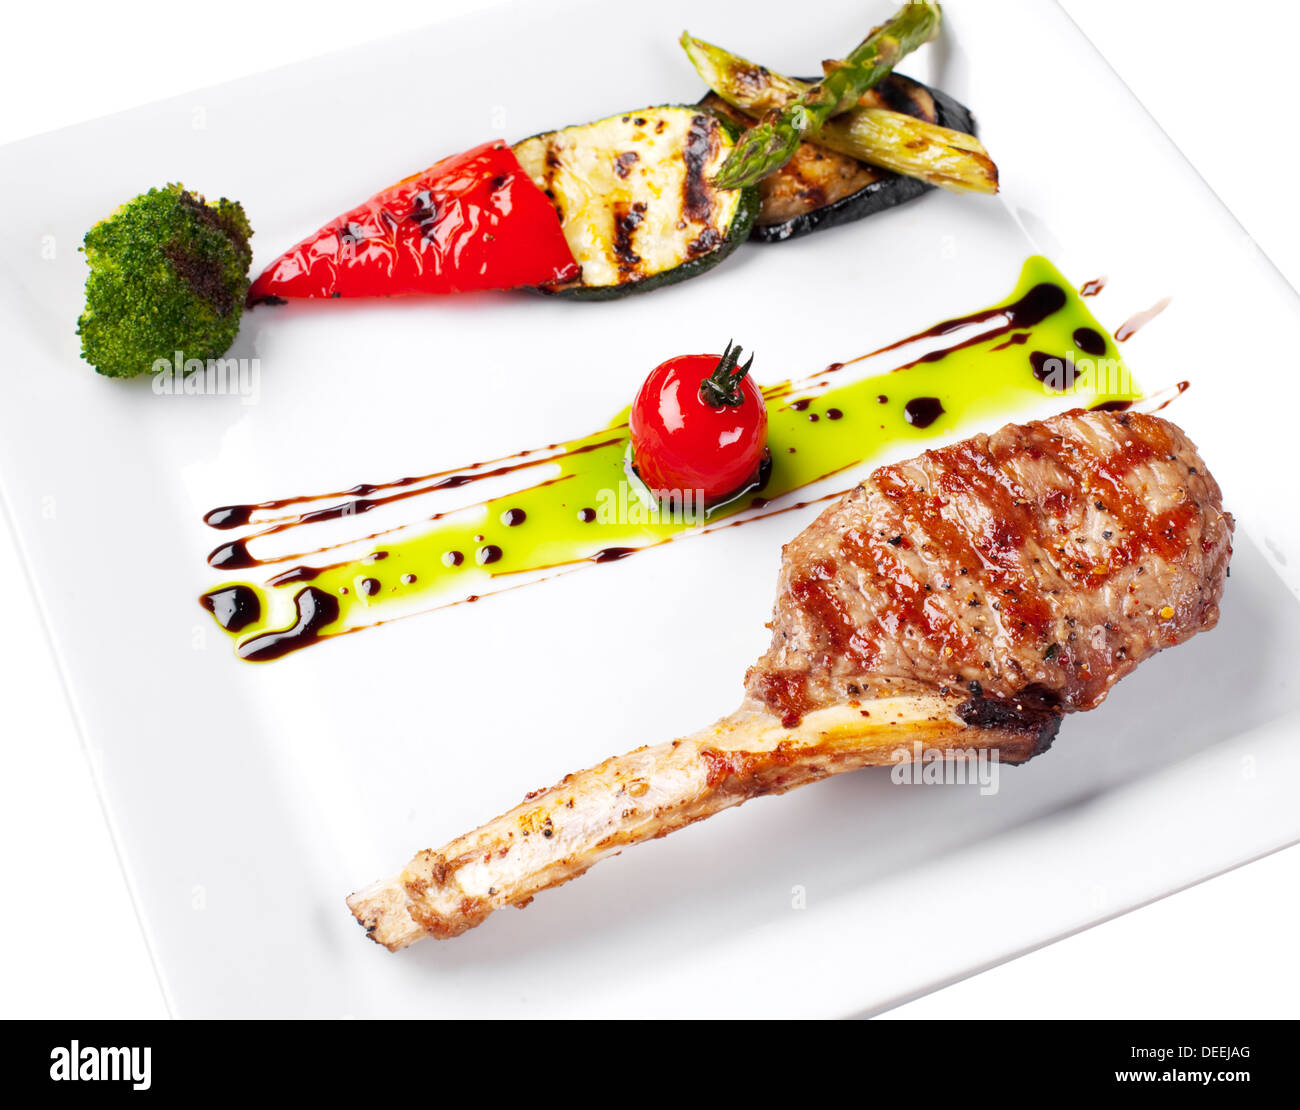 Grilled meat and vegetables on a white plate. Stock Photo